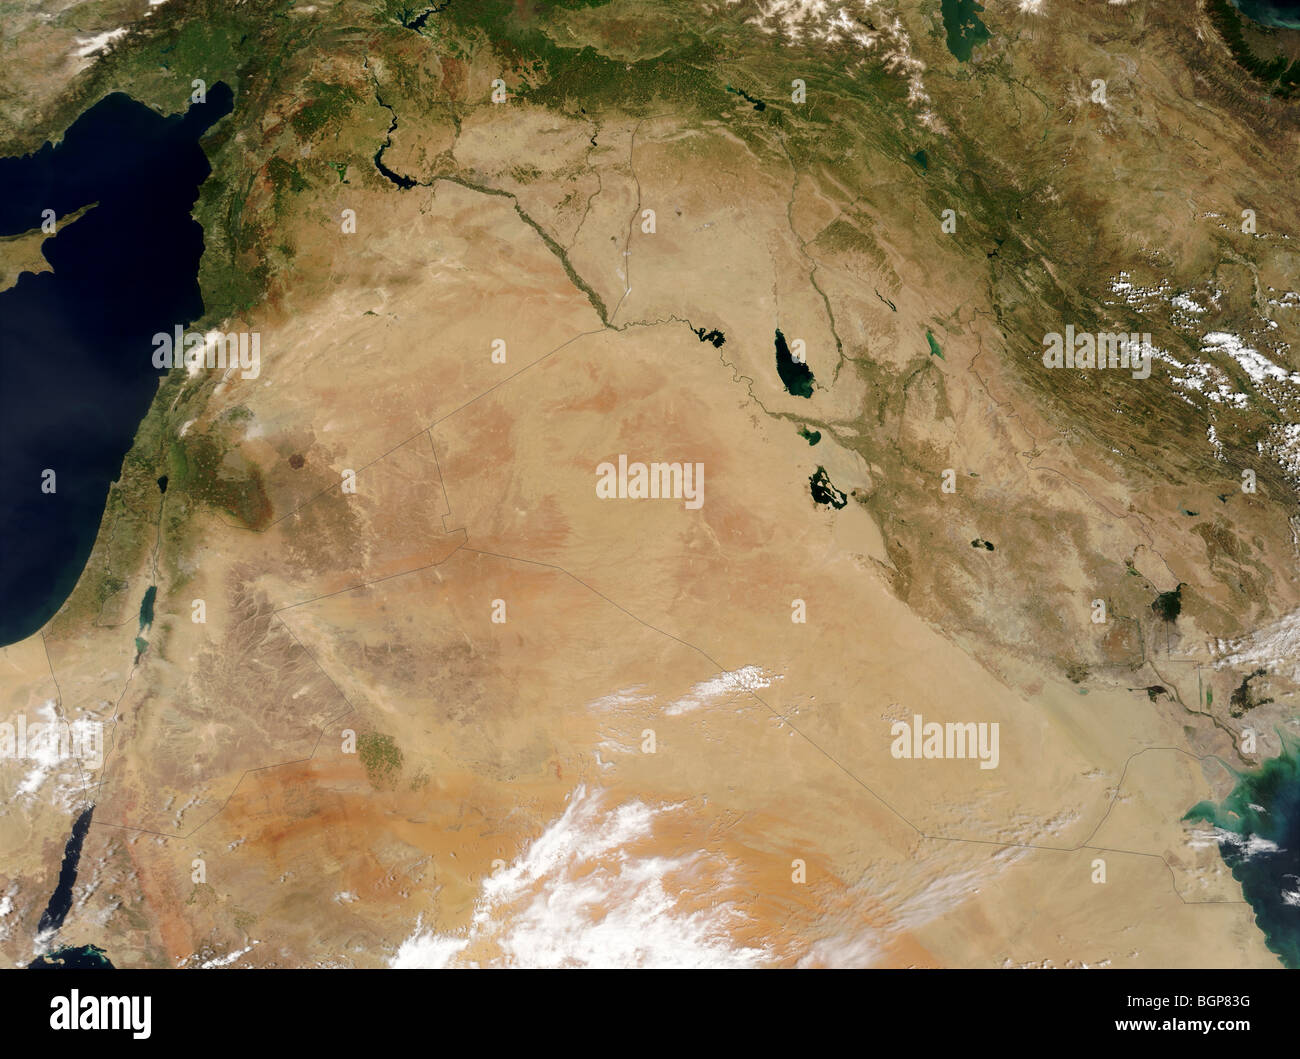 Satellite image of deserts in the Middle East Stock Photo